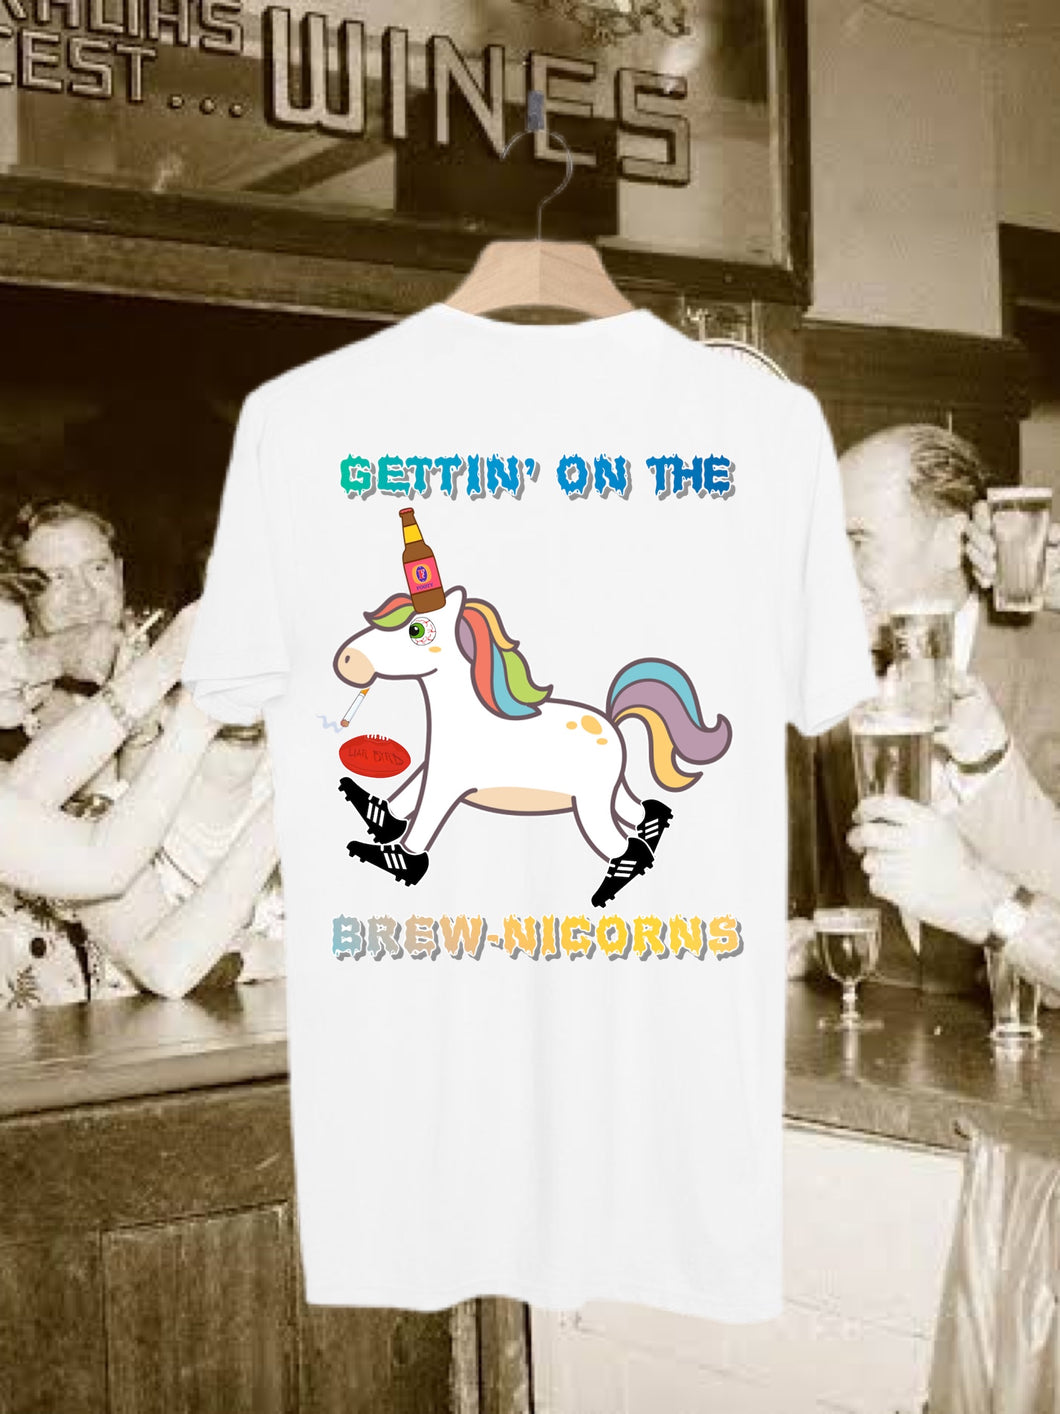 BREW-NICORN: FRONT ONLY